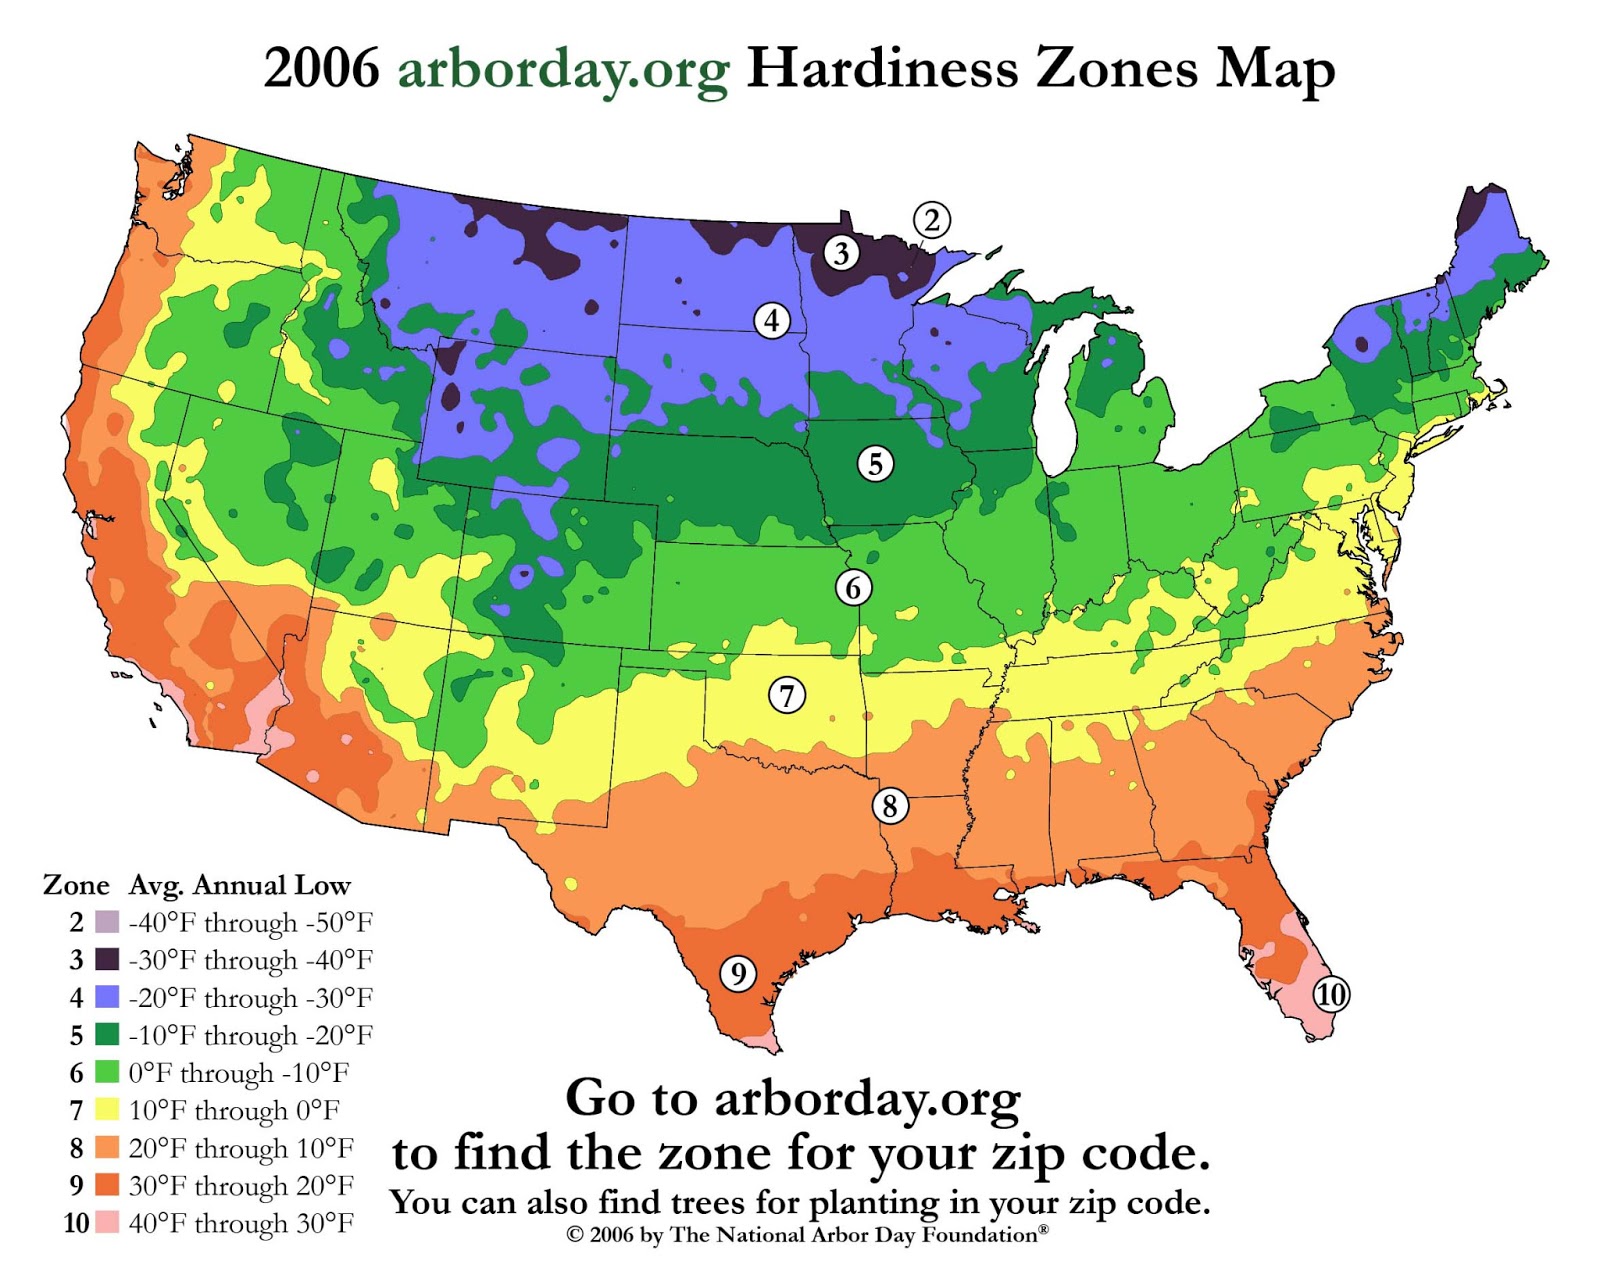 Trees and Tents: Planting/Hardiness zones map